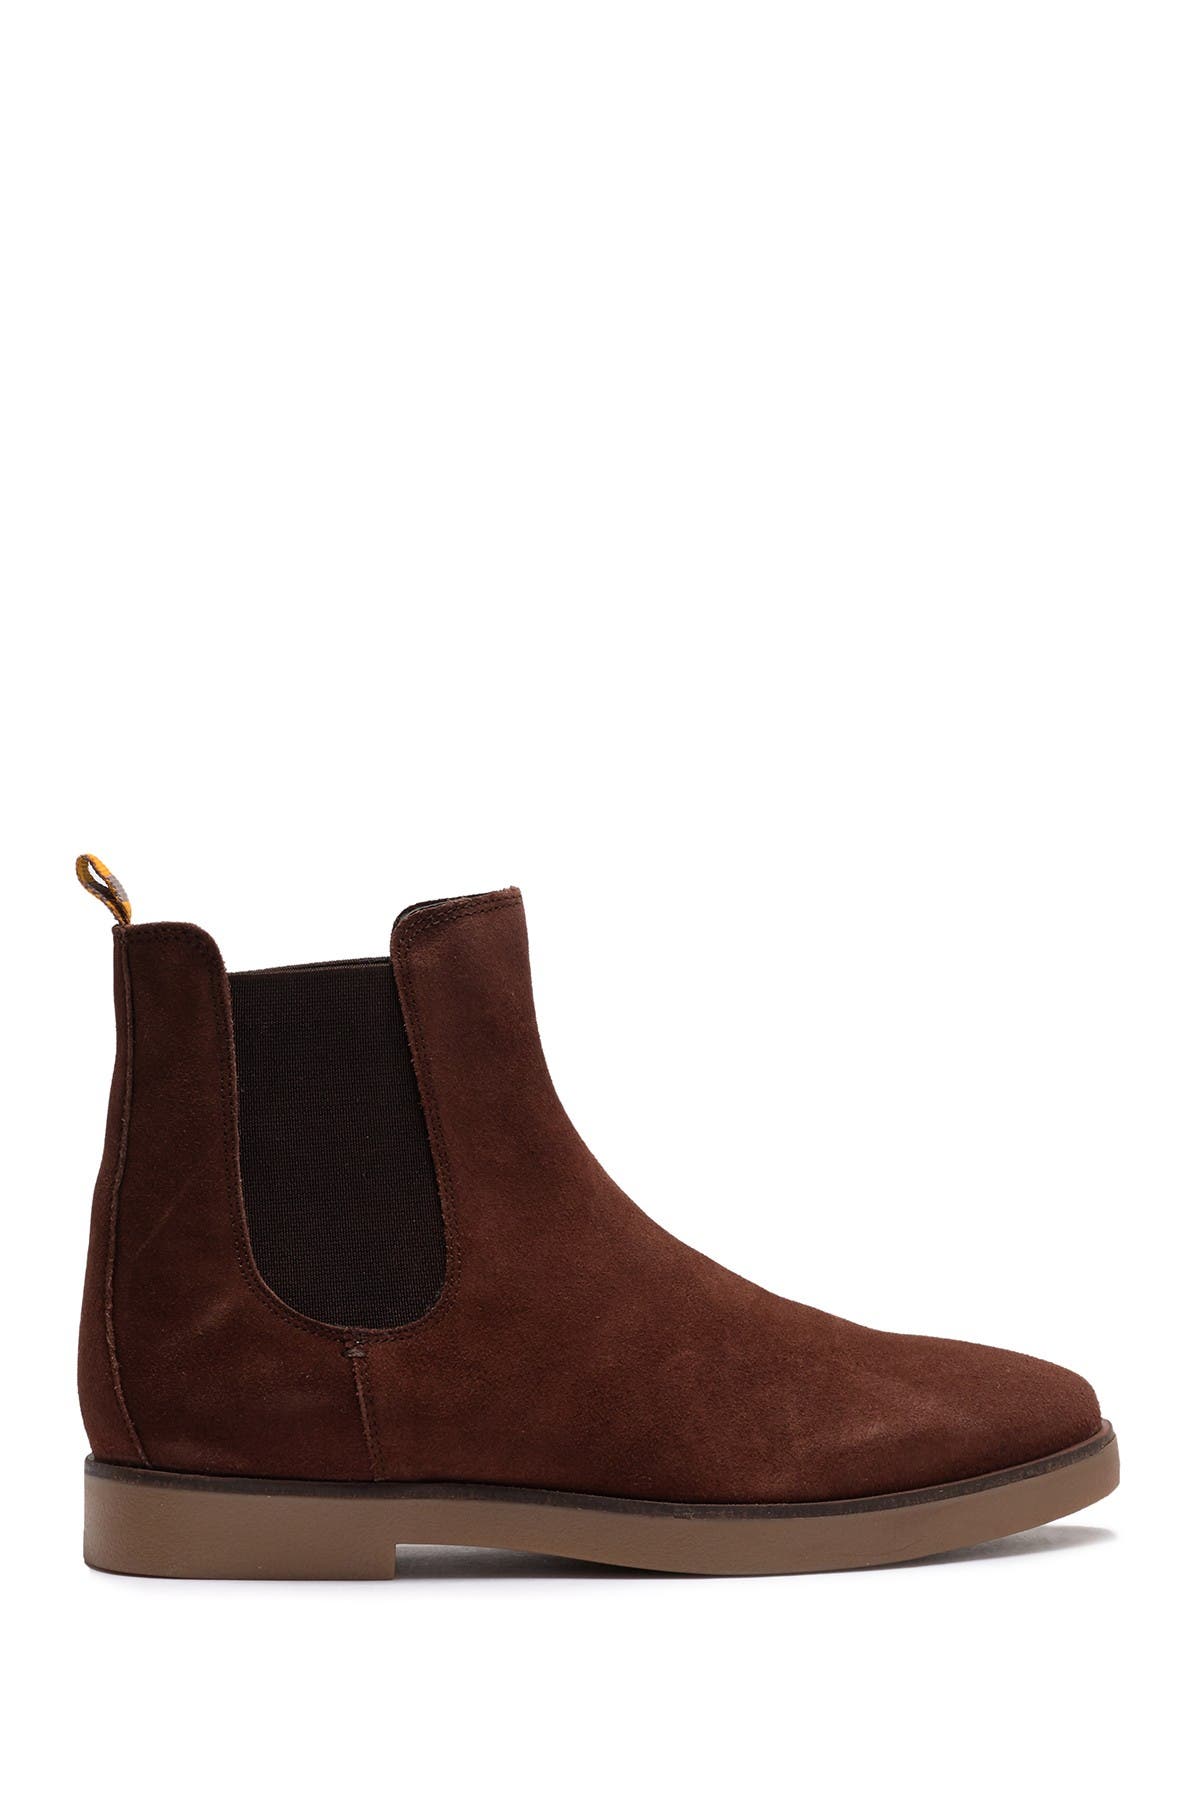 Frank Wright | Dutch Suede Chelsea Boot 